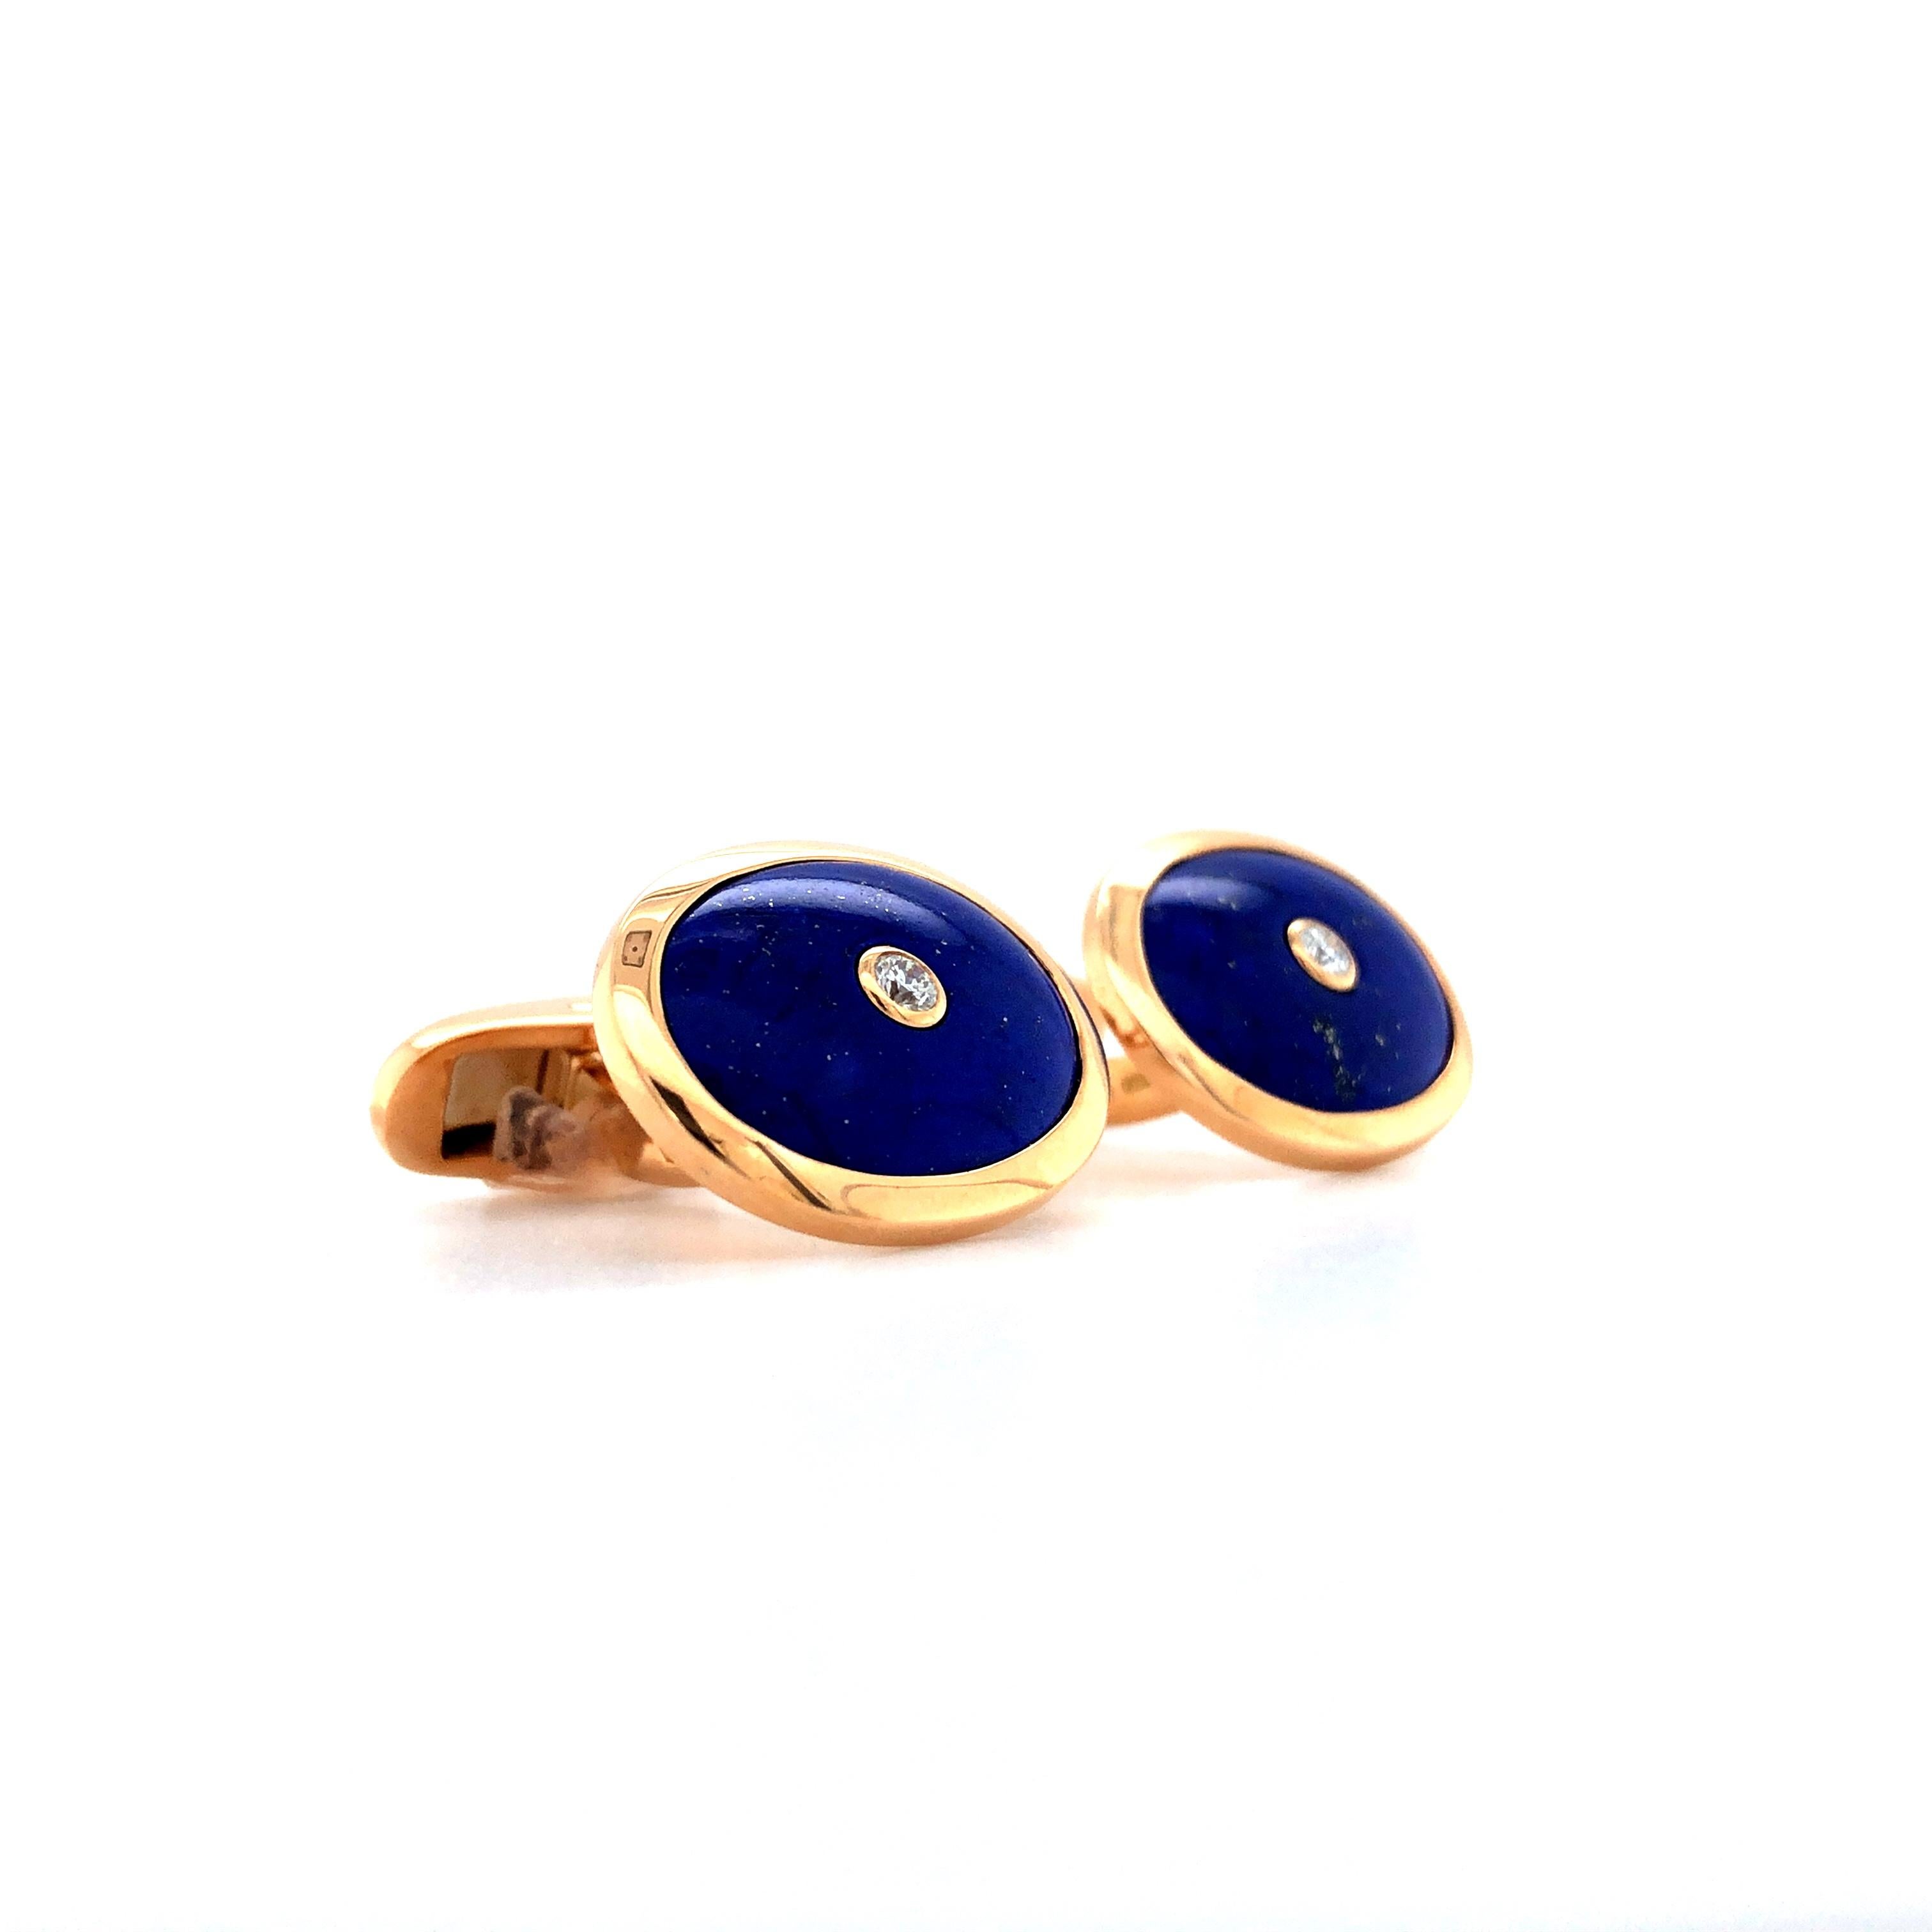 Victor Mayer oval cufflinks, 18k rose gold, Hallmark Collection, lapis lazuli inlay, 2 diamonds total 0.12 ct H VS 

About the creator Victor Mayer
Victor Mayer is internationally renowned for elegant timeless designs and unrivalled expertise in